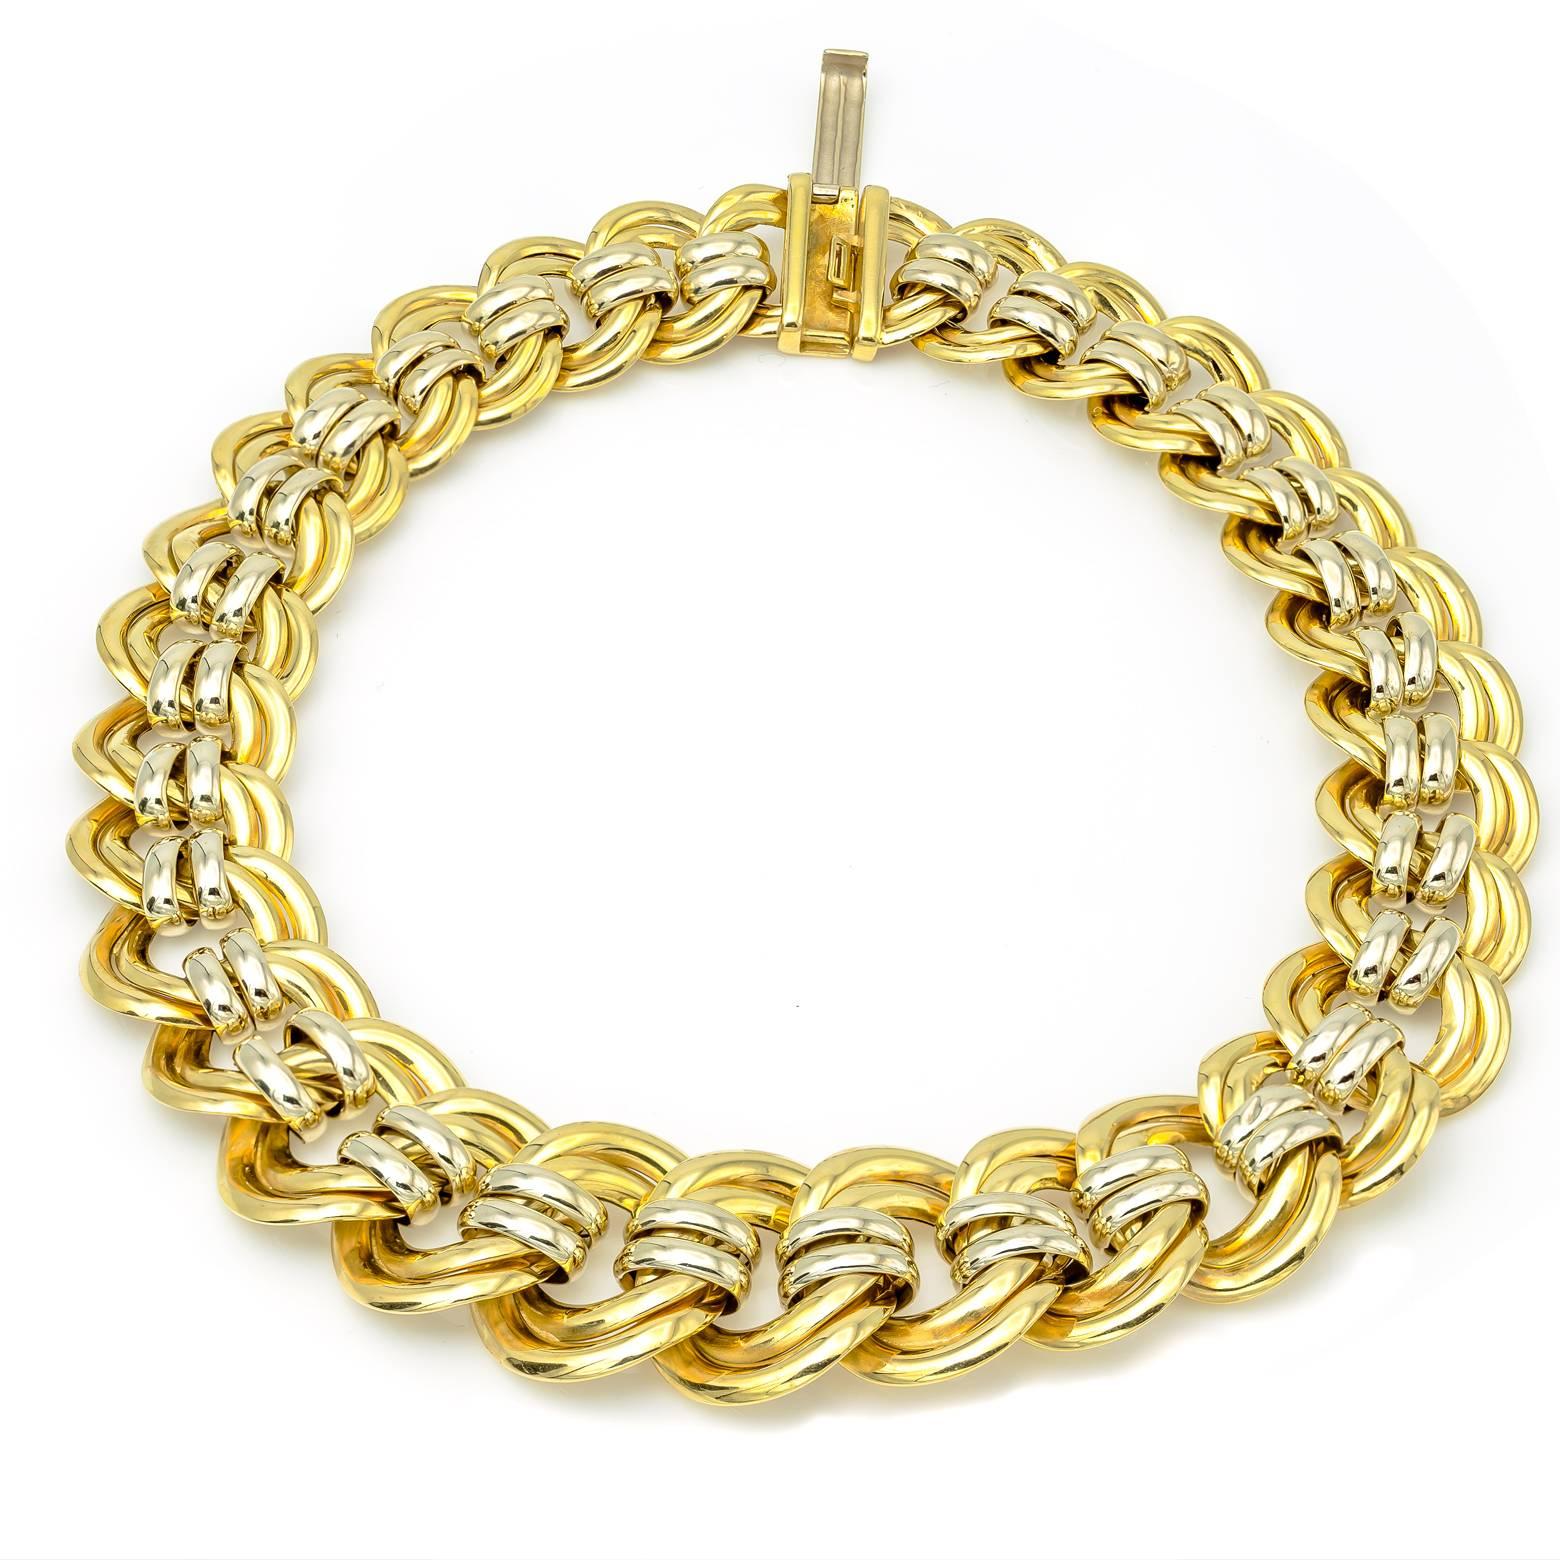 This large and thick gold chain necklace tapers towards the ends and exhibits grandiose circle links in the middle. 18K yellow gold rope-like comfortable, lightweight considering the size, and fun to wear! 